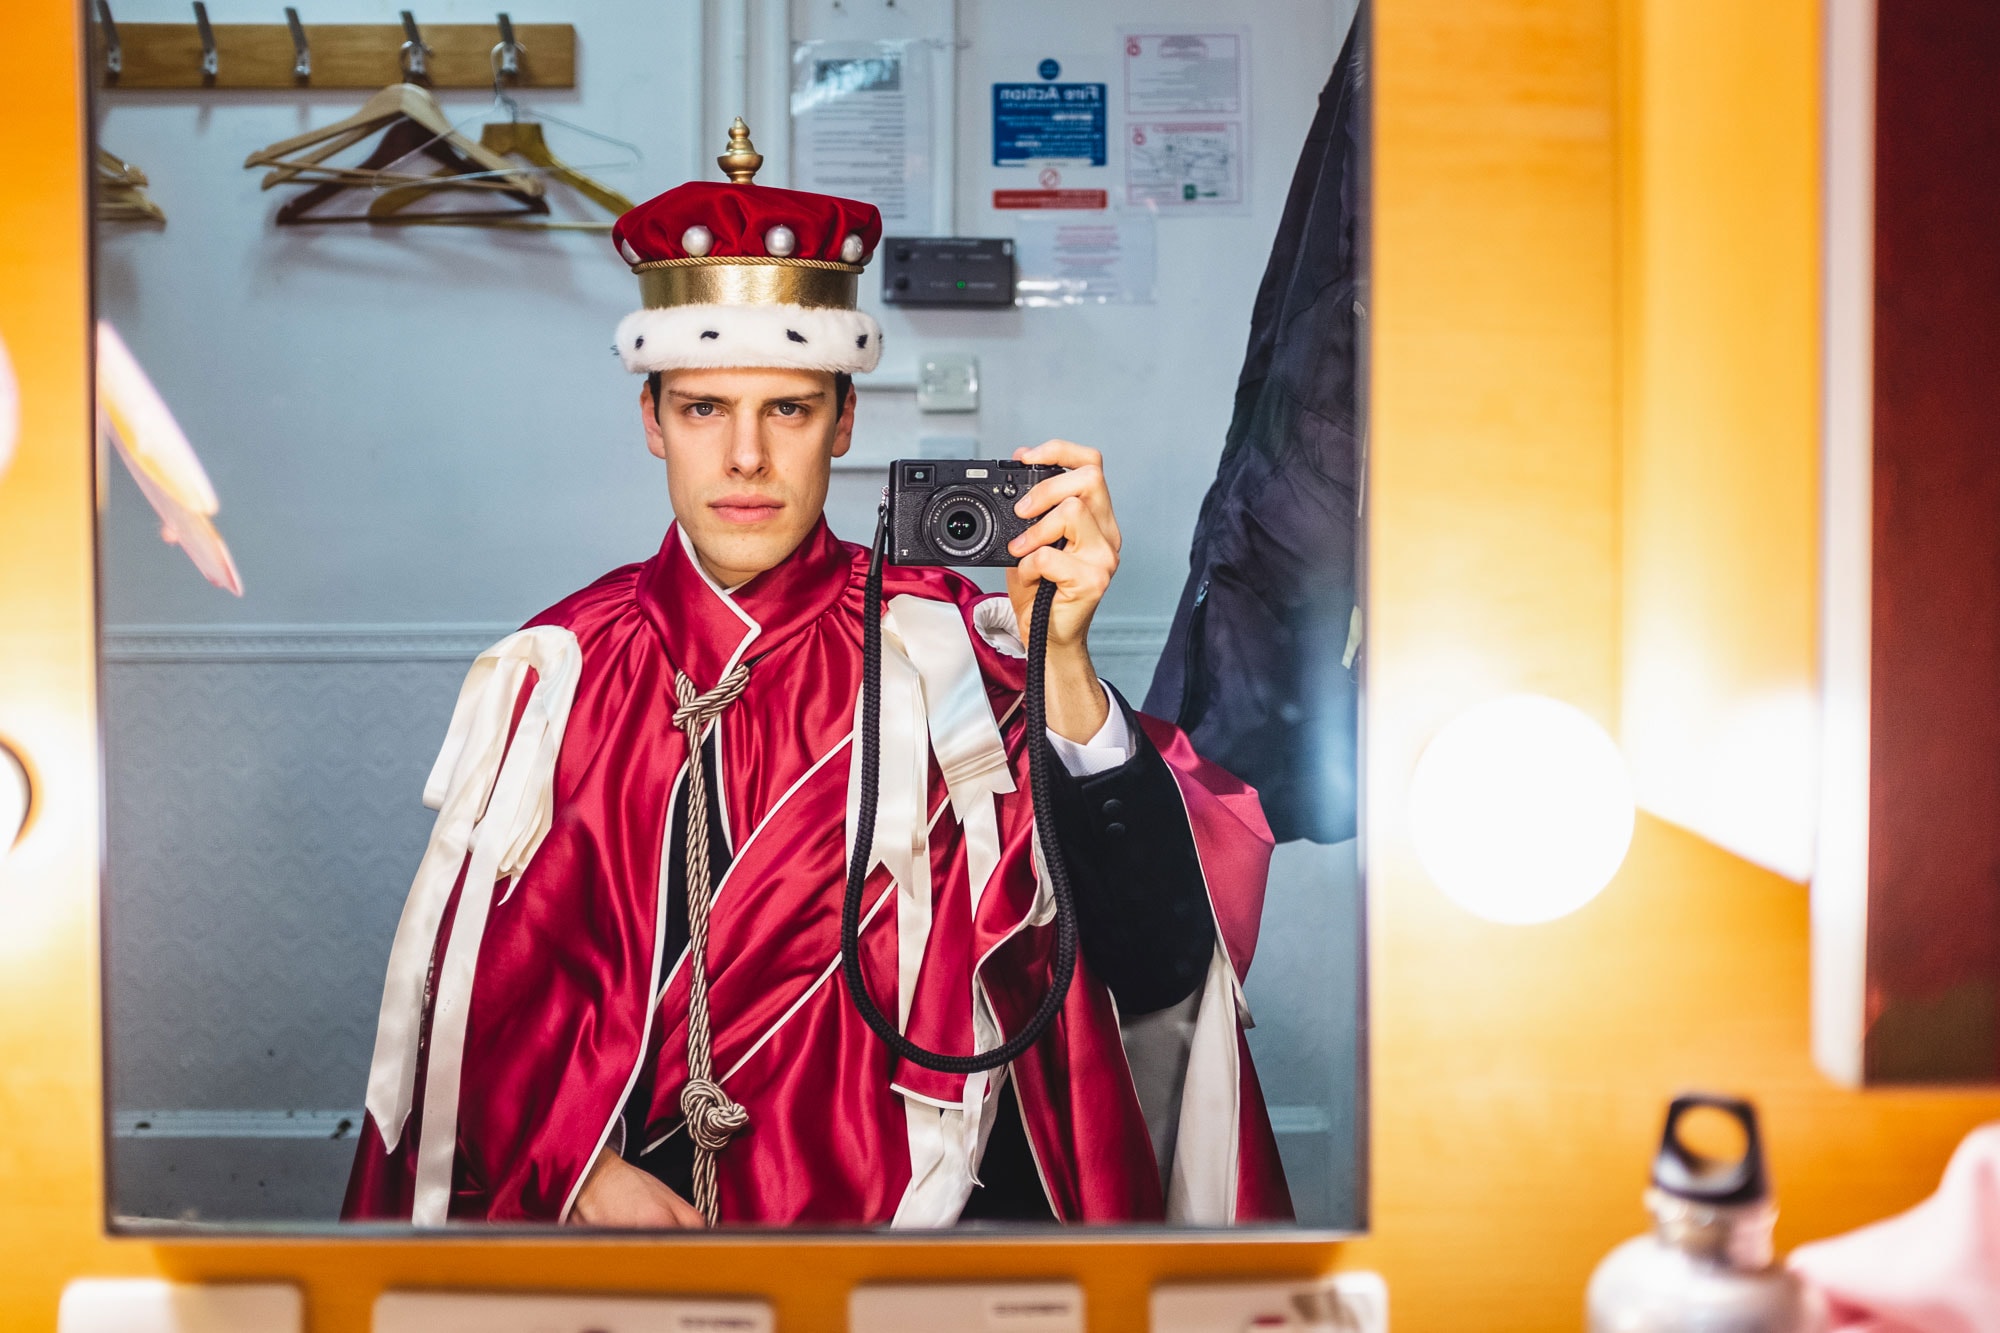 man taking a picture in the mirror: wearing a royal robe and crown